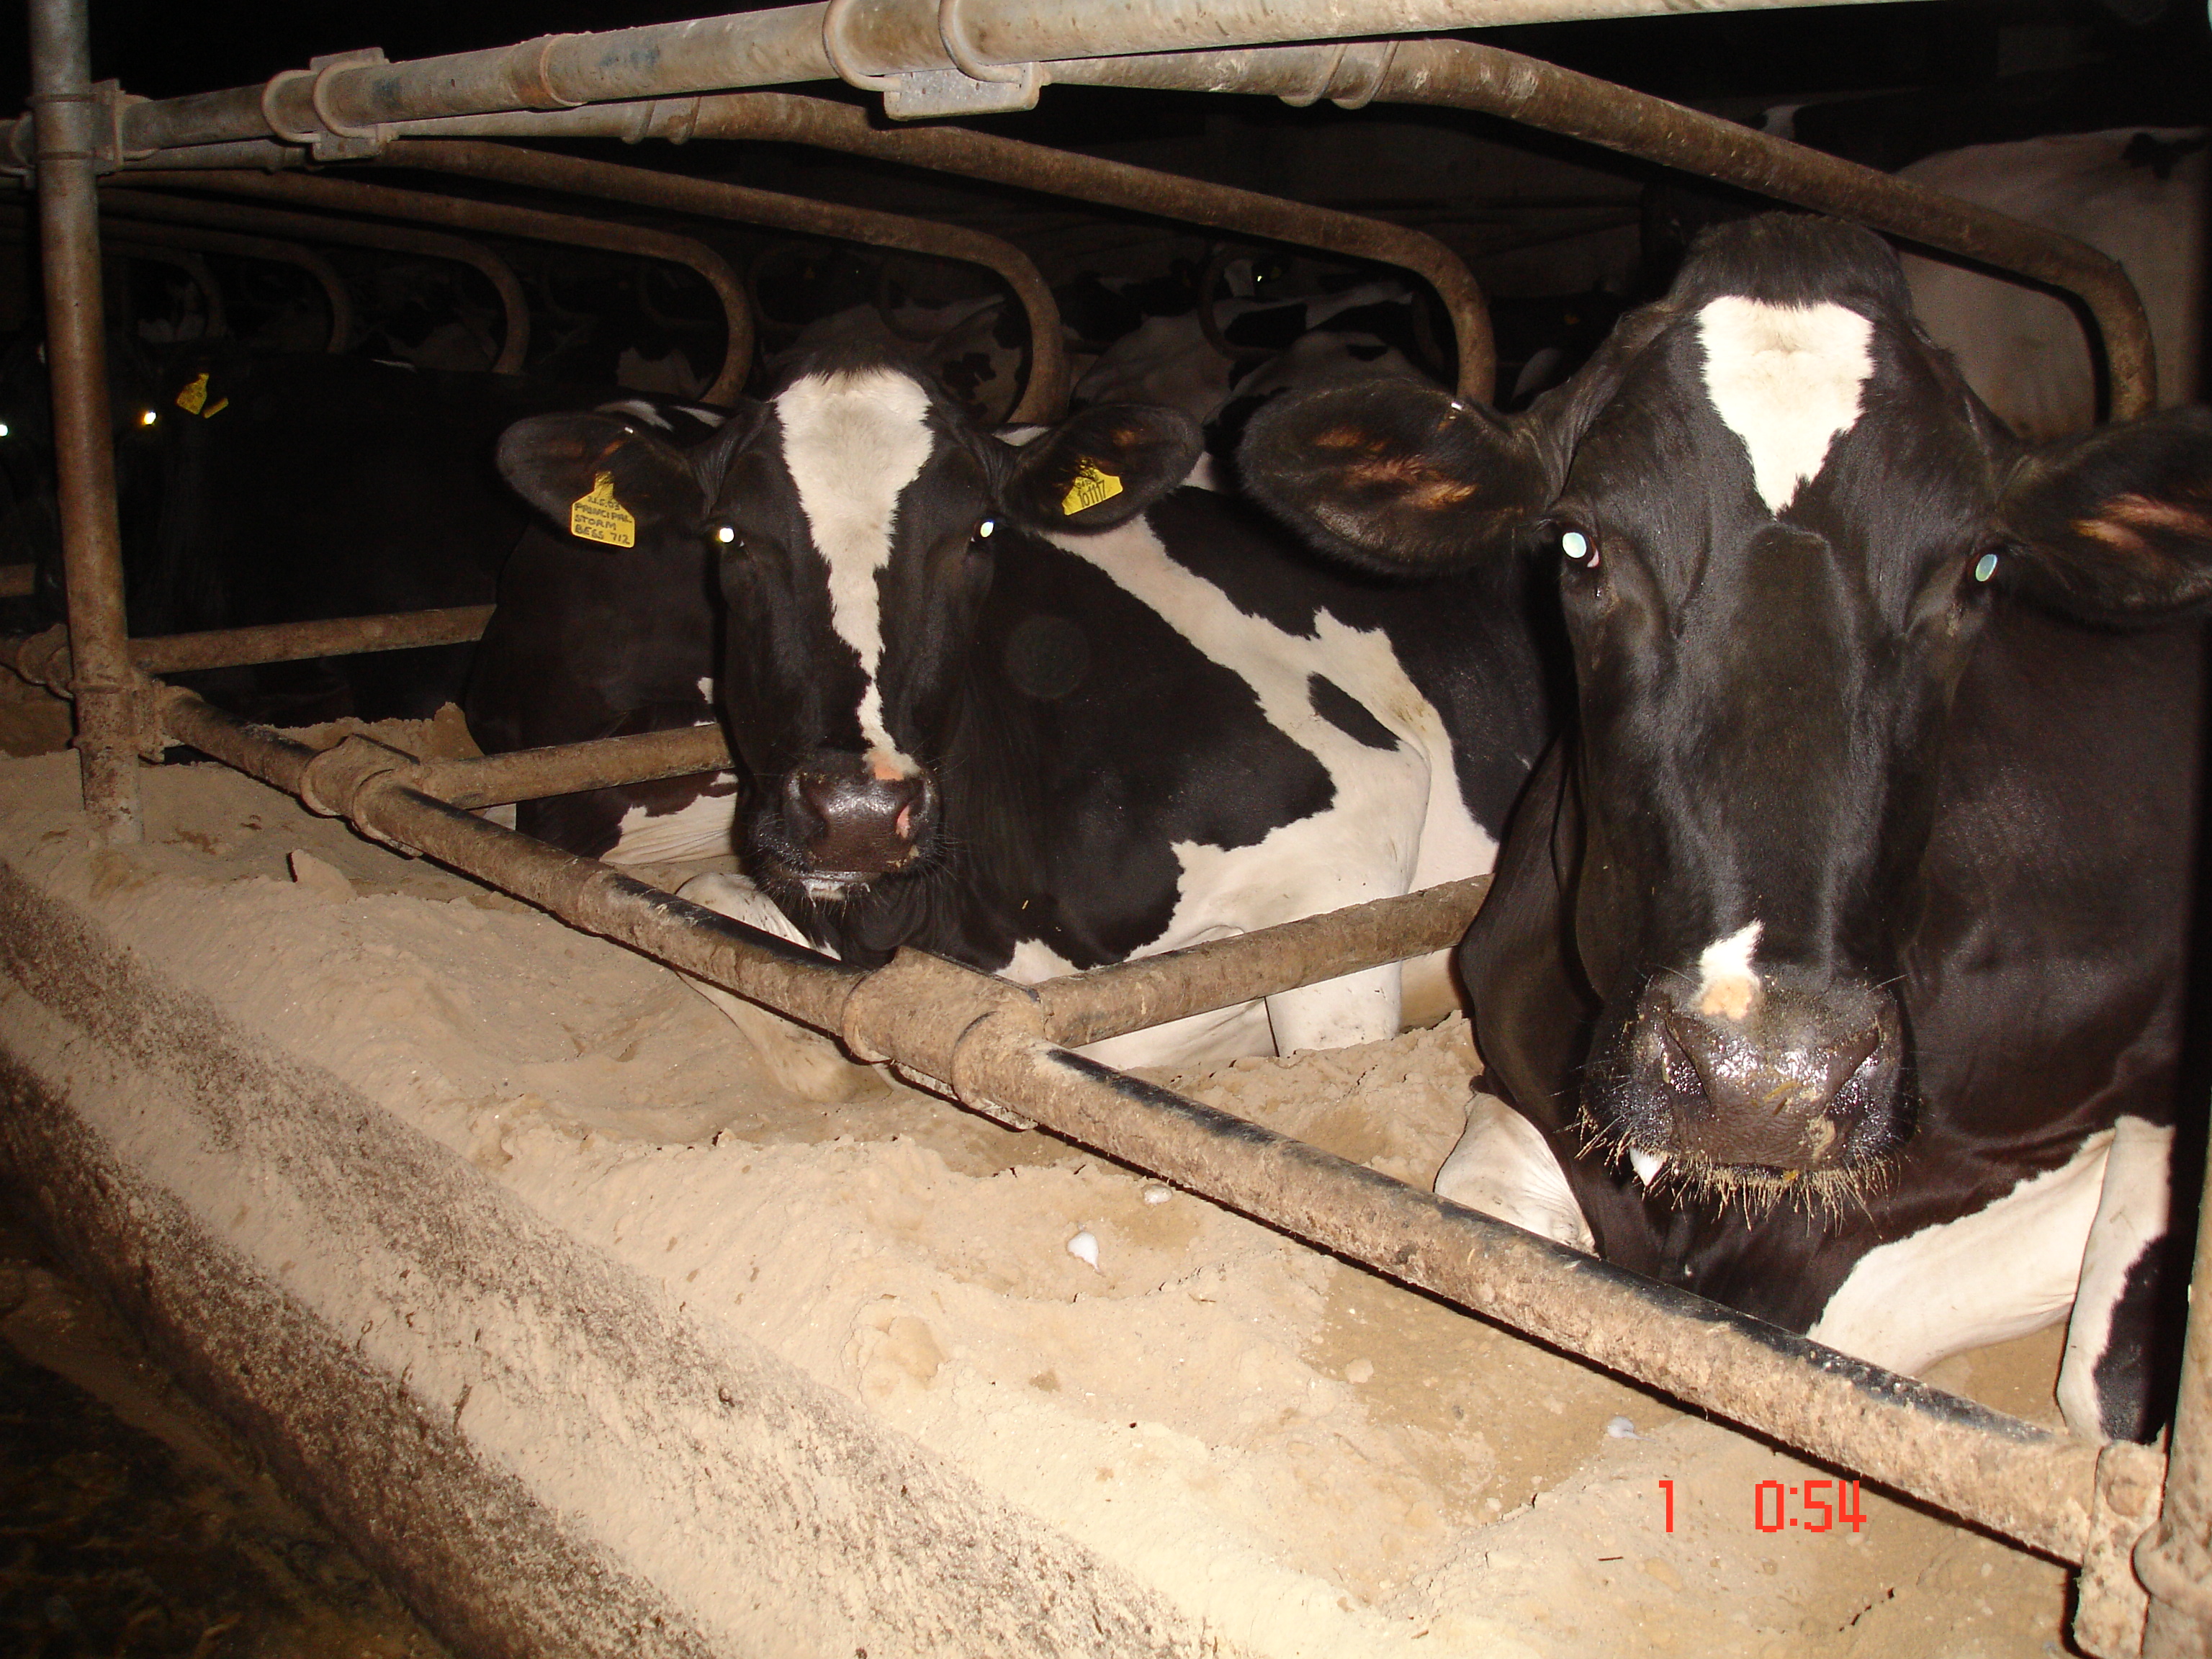 Cows confined in crates